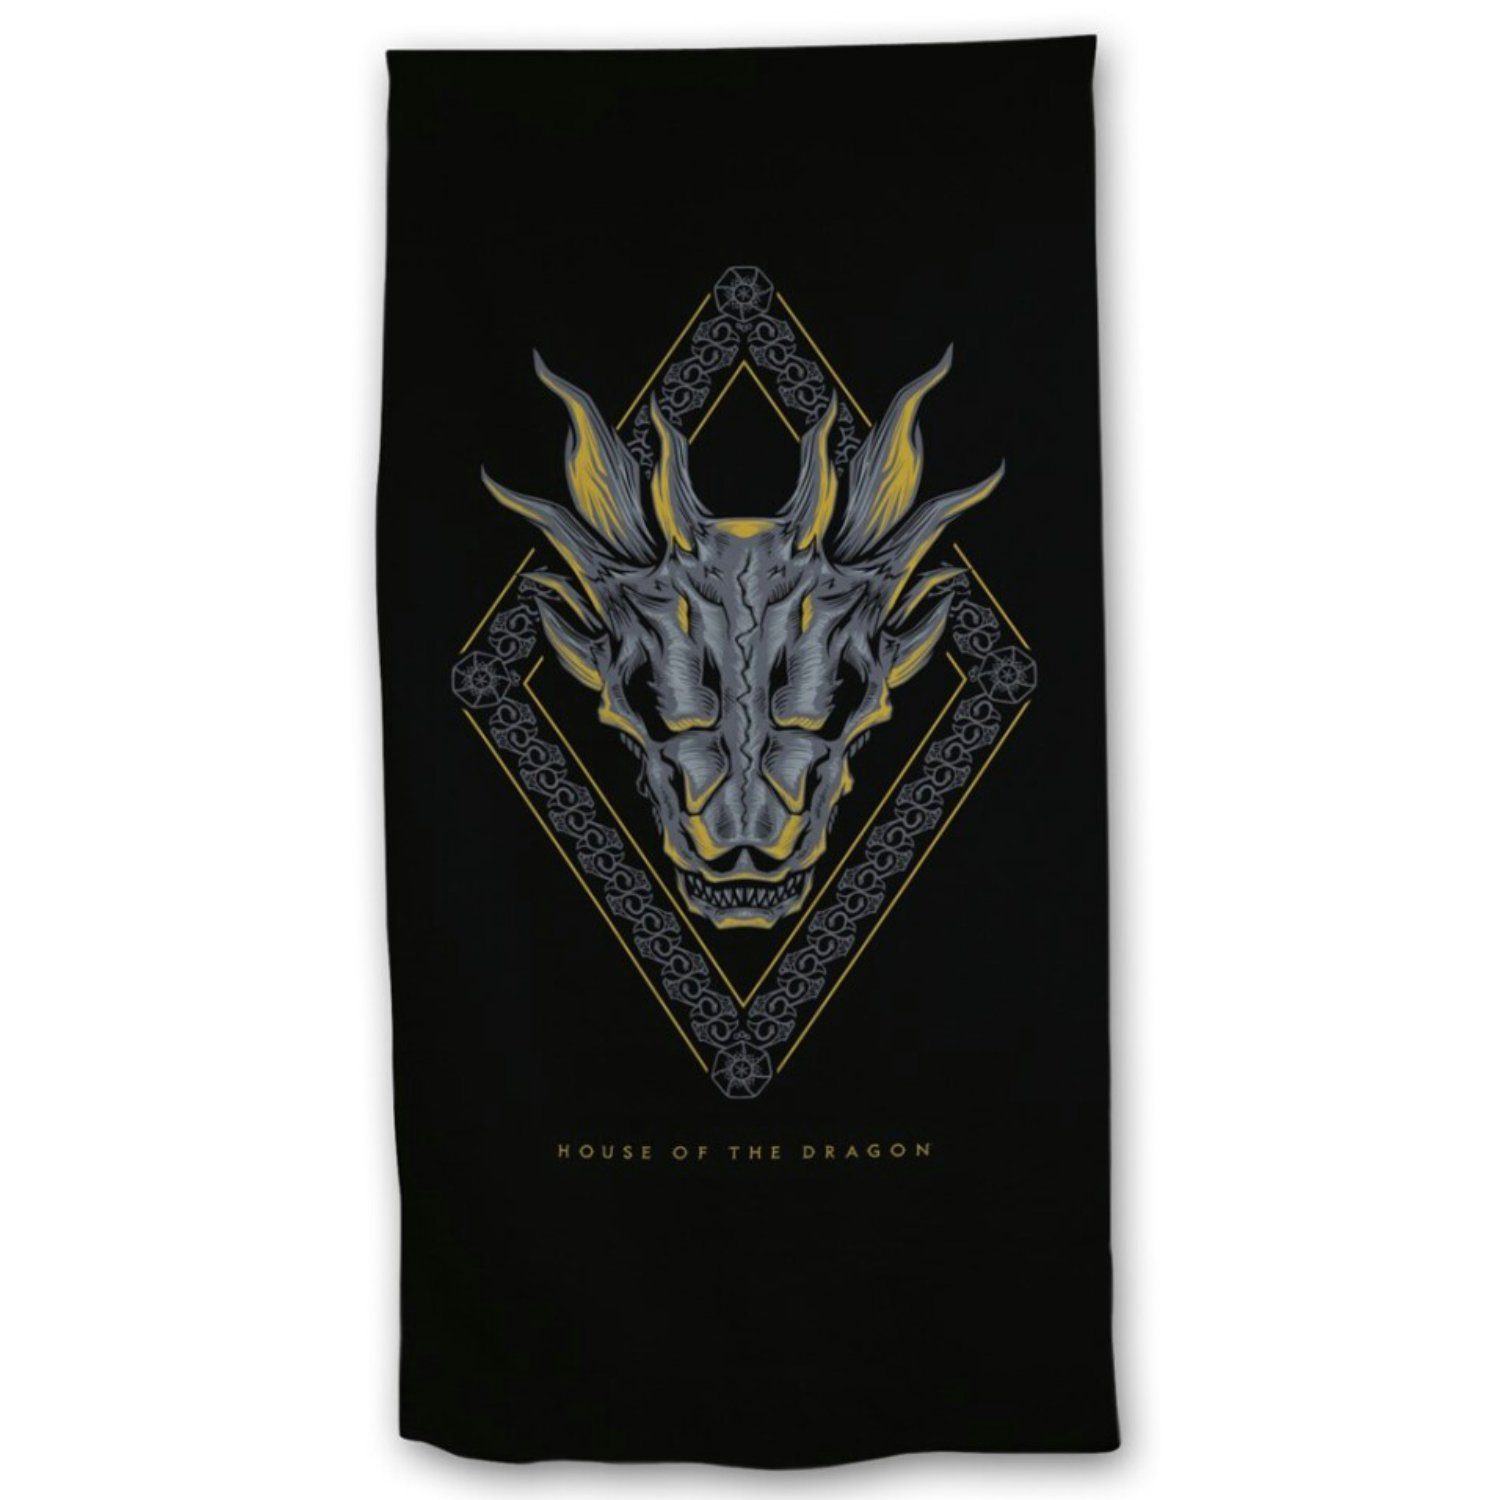 Game of Thrones Strandtuch Game of Thrones House of Dragon Badetuch Mikrofaser, Polyester, Größe 70x140 cm